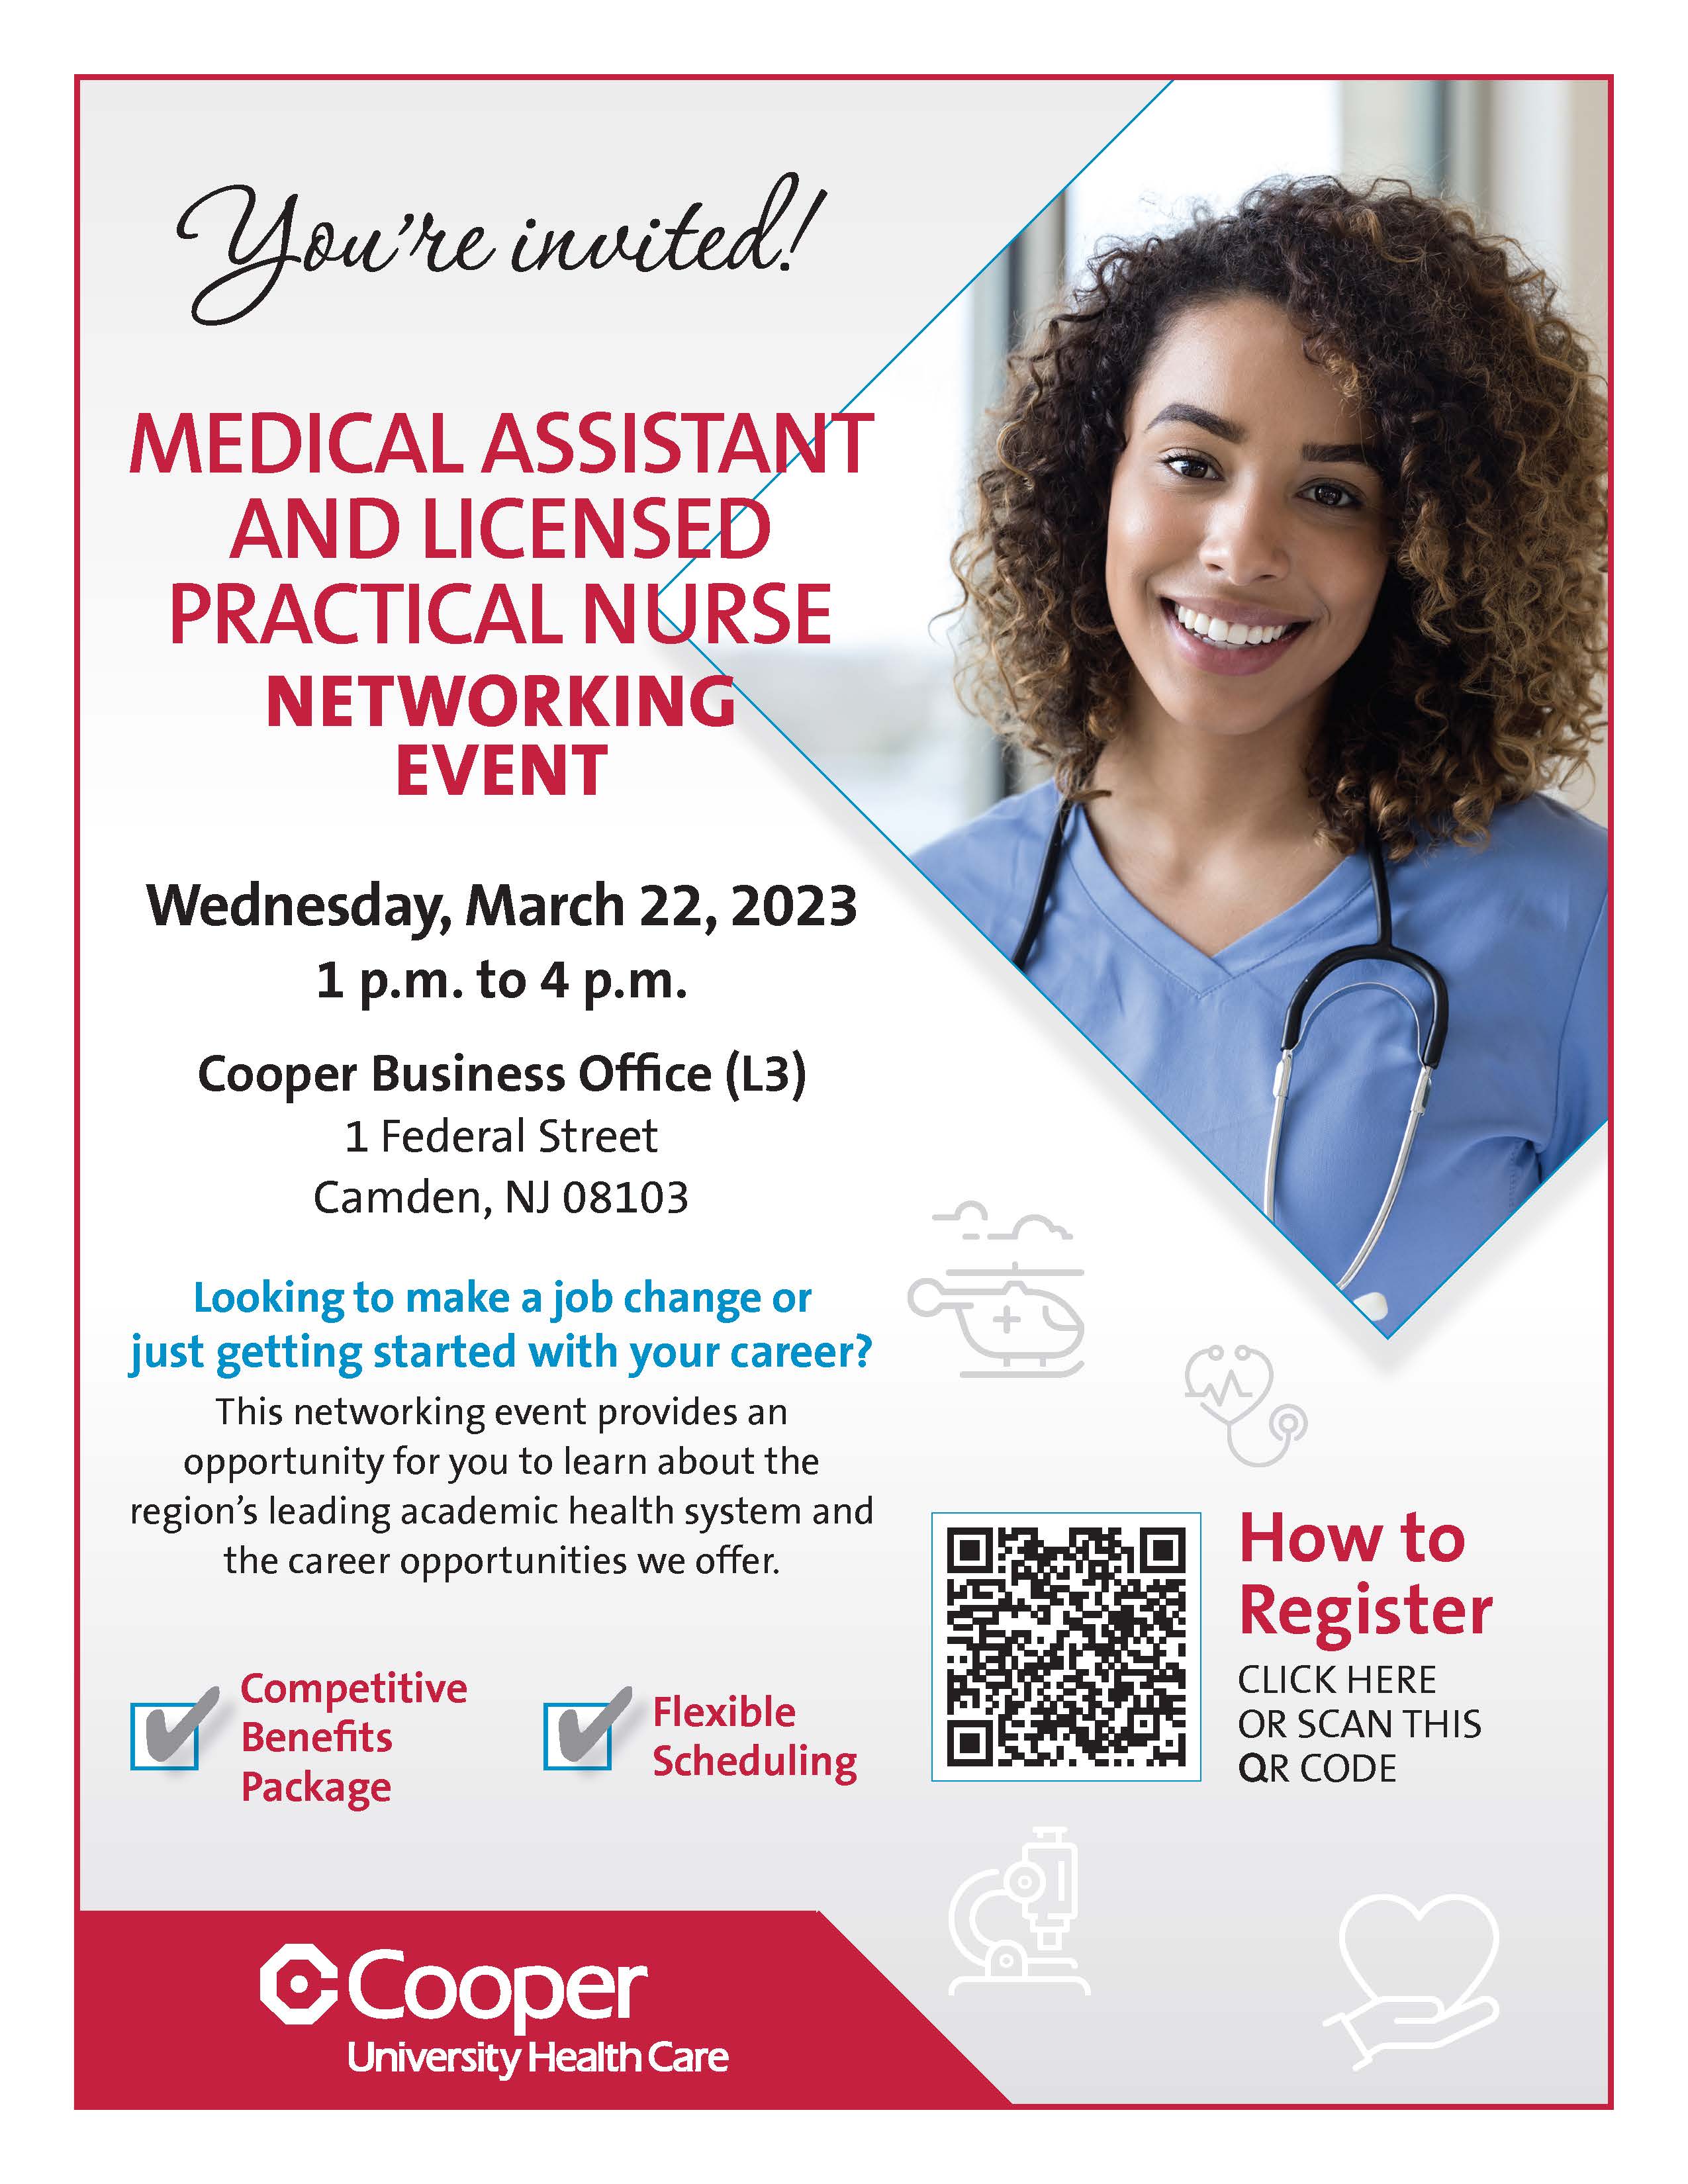 Medical Assistant and Licensed Practical Nurse Networking Event FLYER-March 22 2023 (L3)